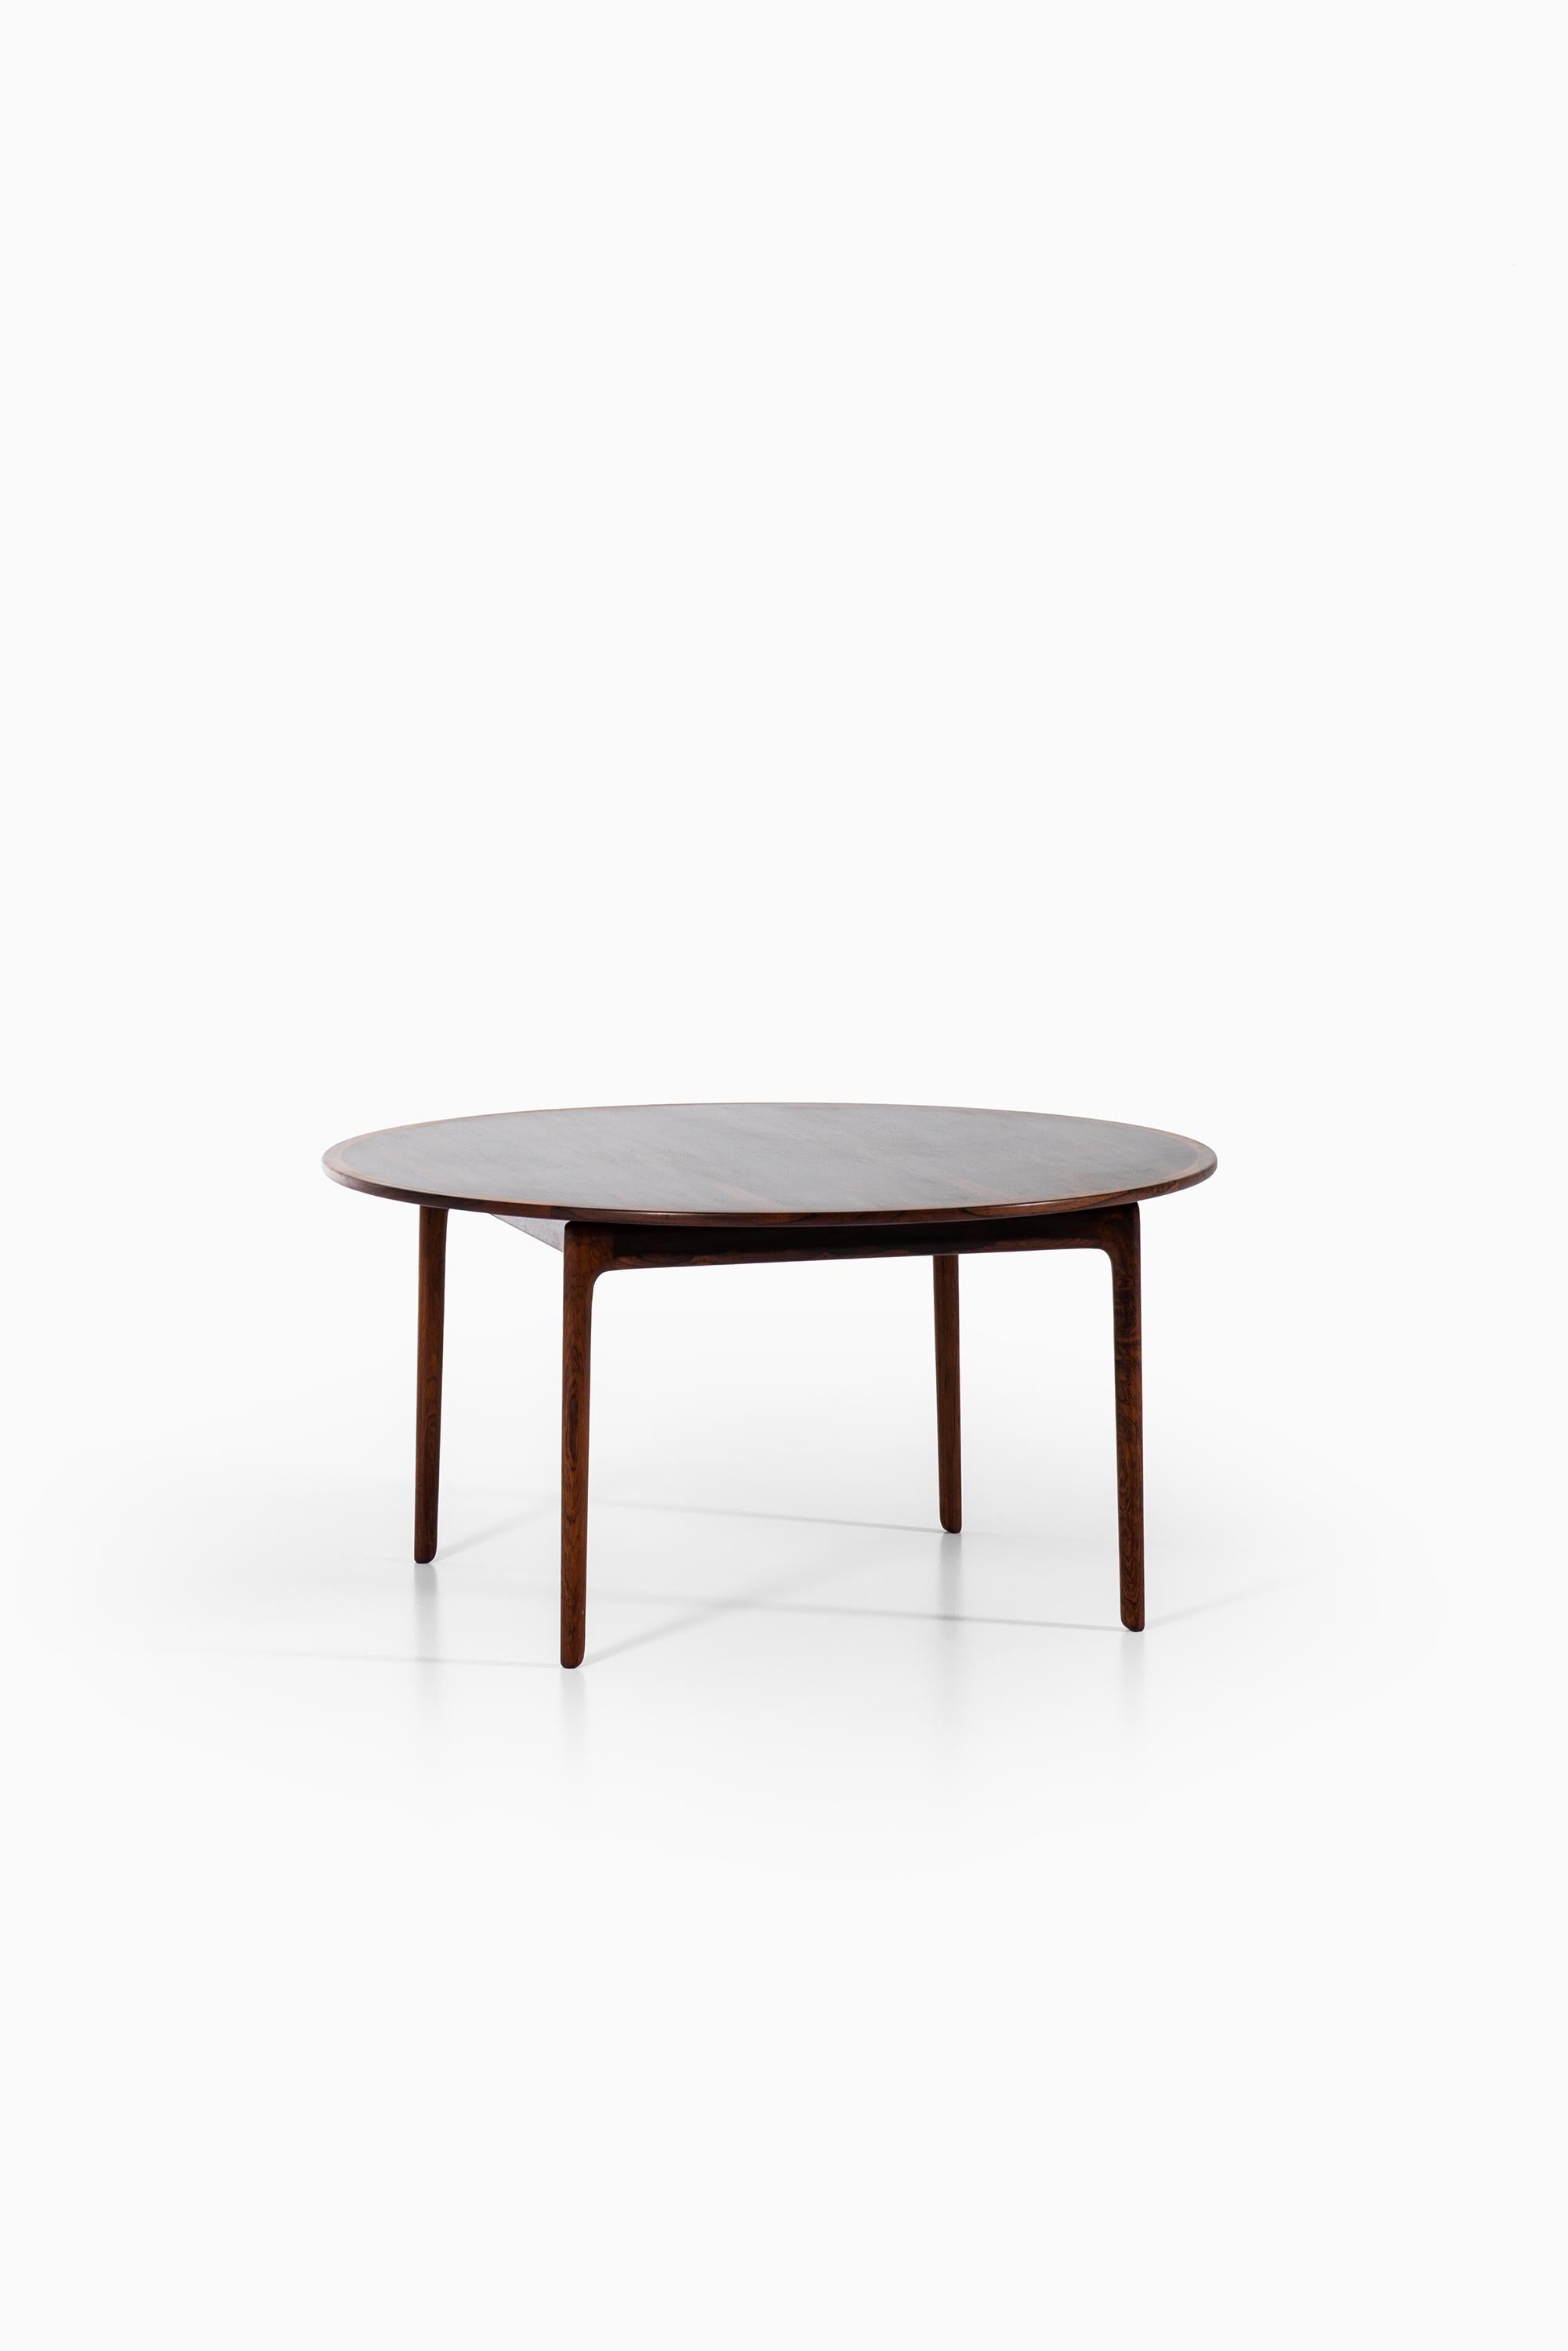 Rare coffee table designed by Ole Wanscher. Produced by P. Jeppesens Møbelfabrik in Denmark.